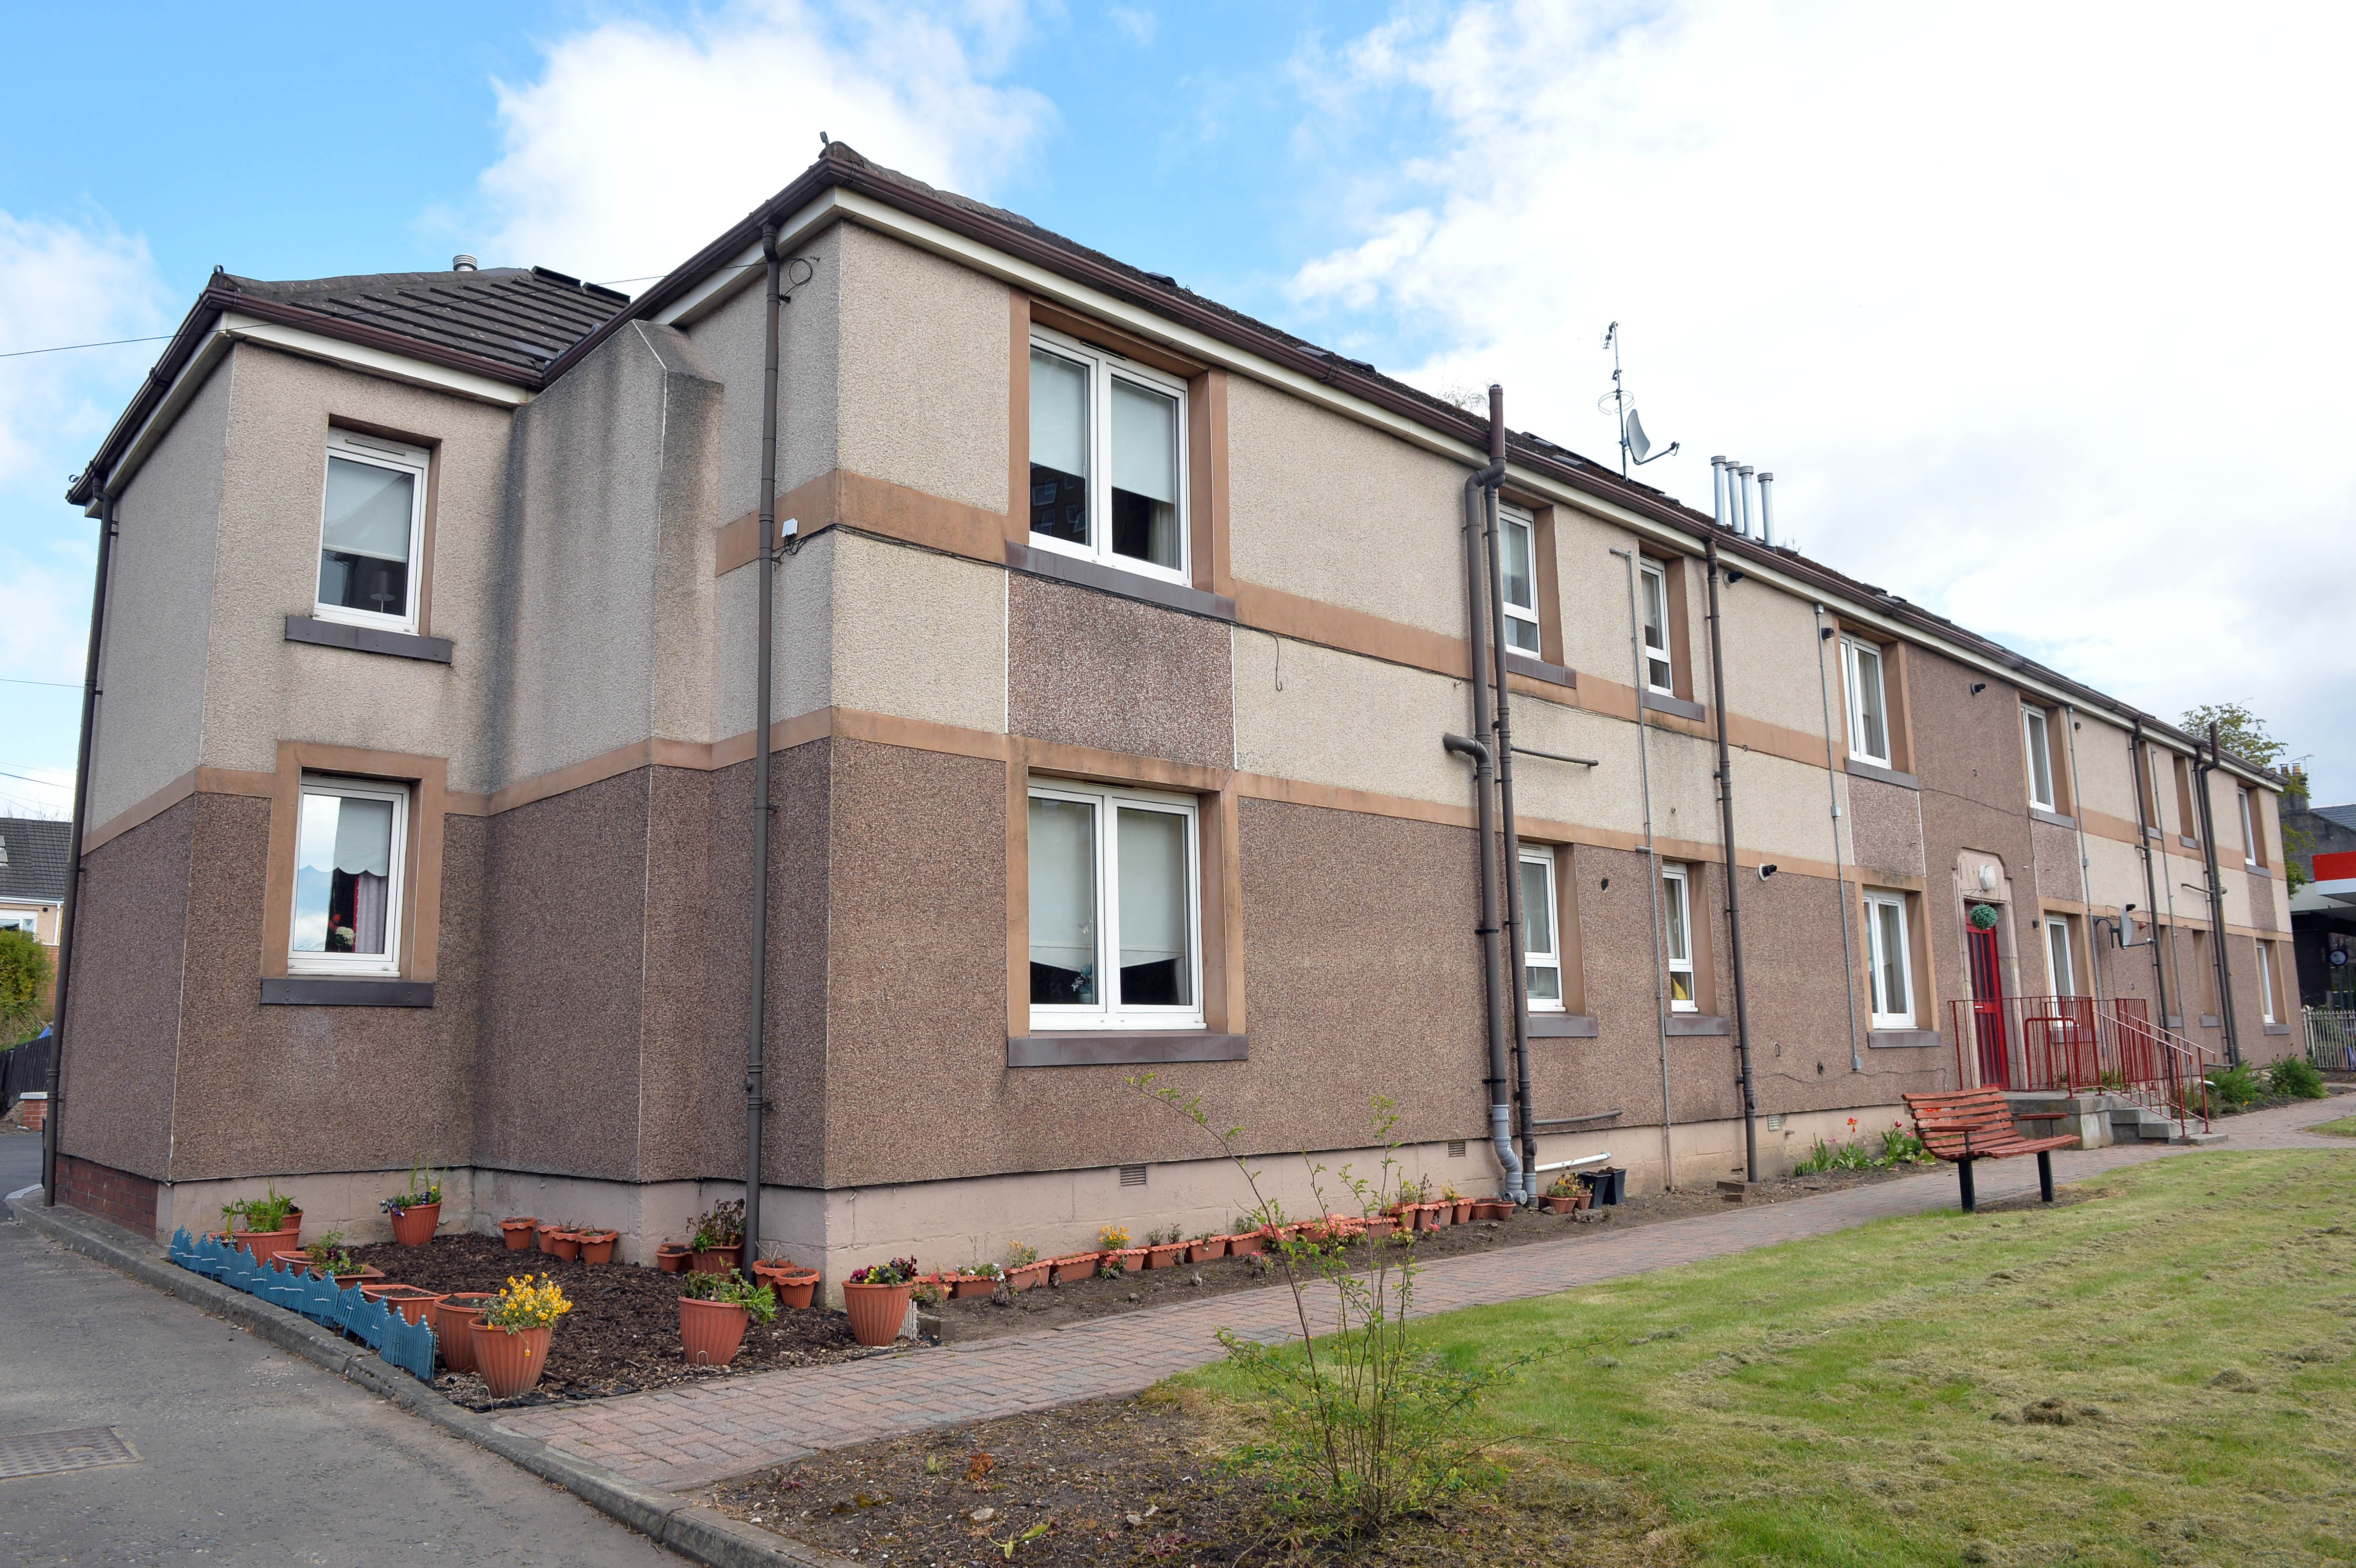 North Lanarkshire Council home buying scheme extended